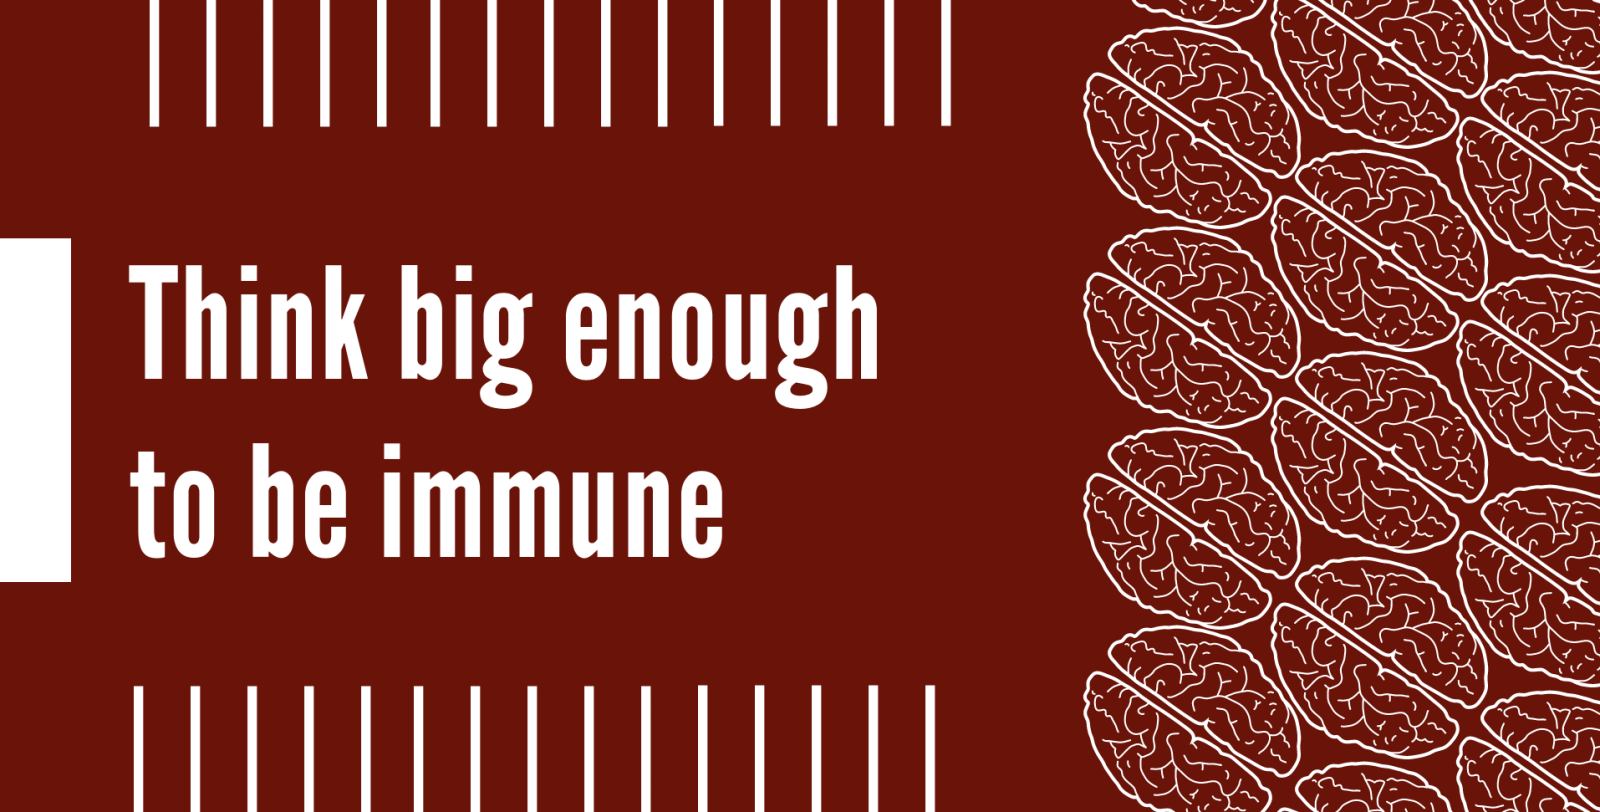 Think big enough to be immune